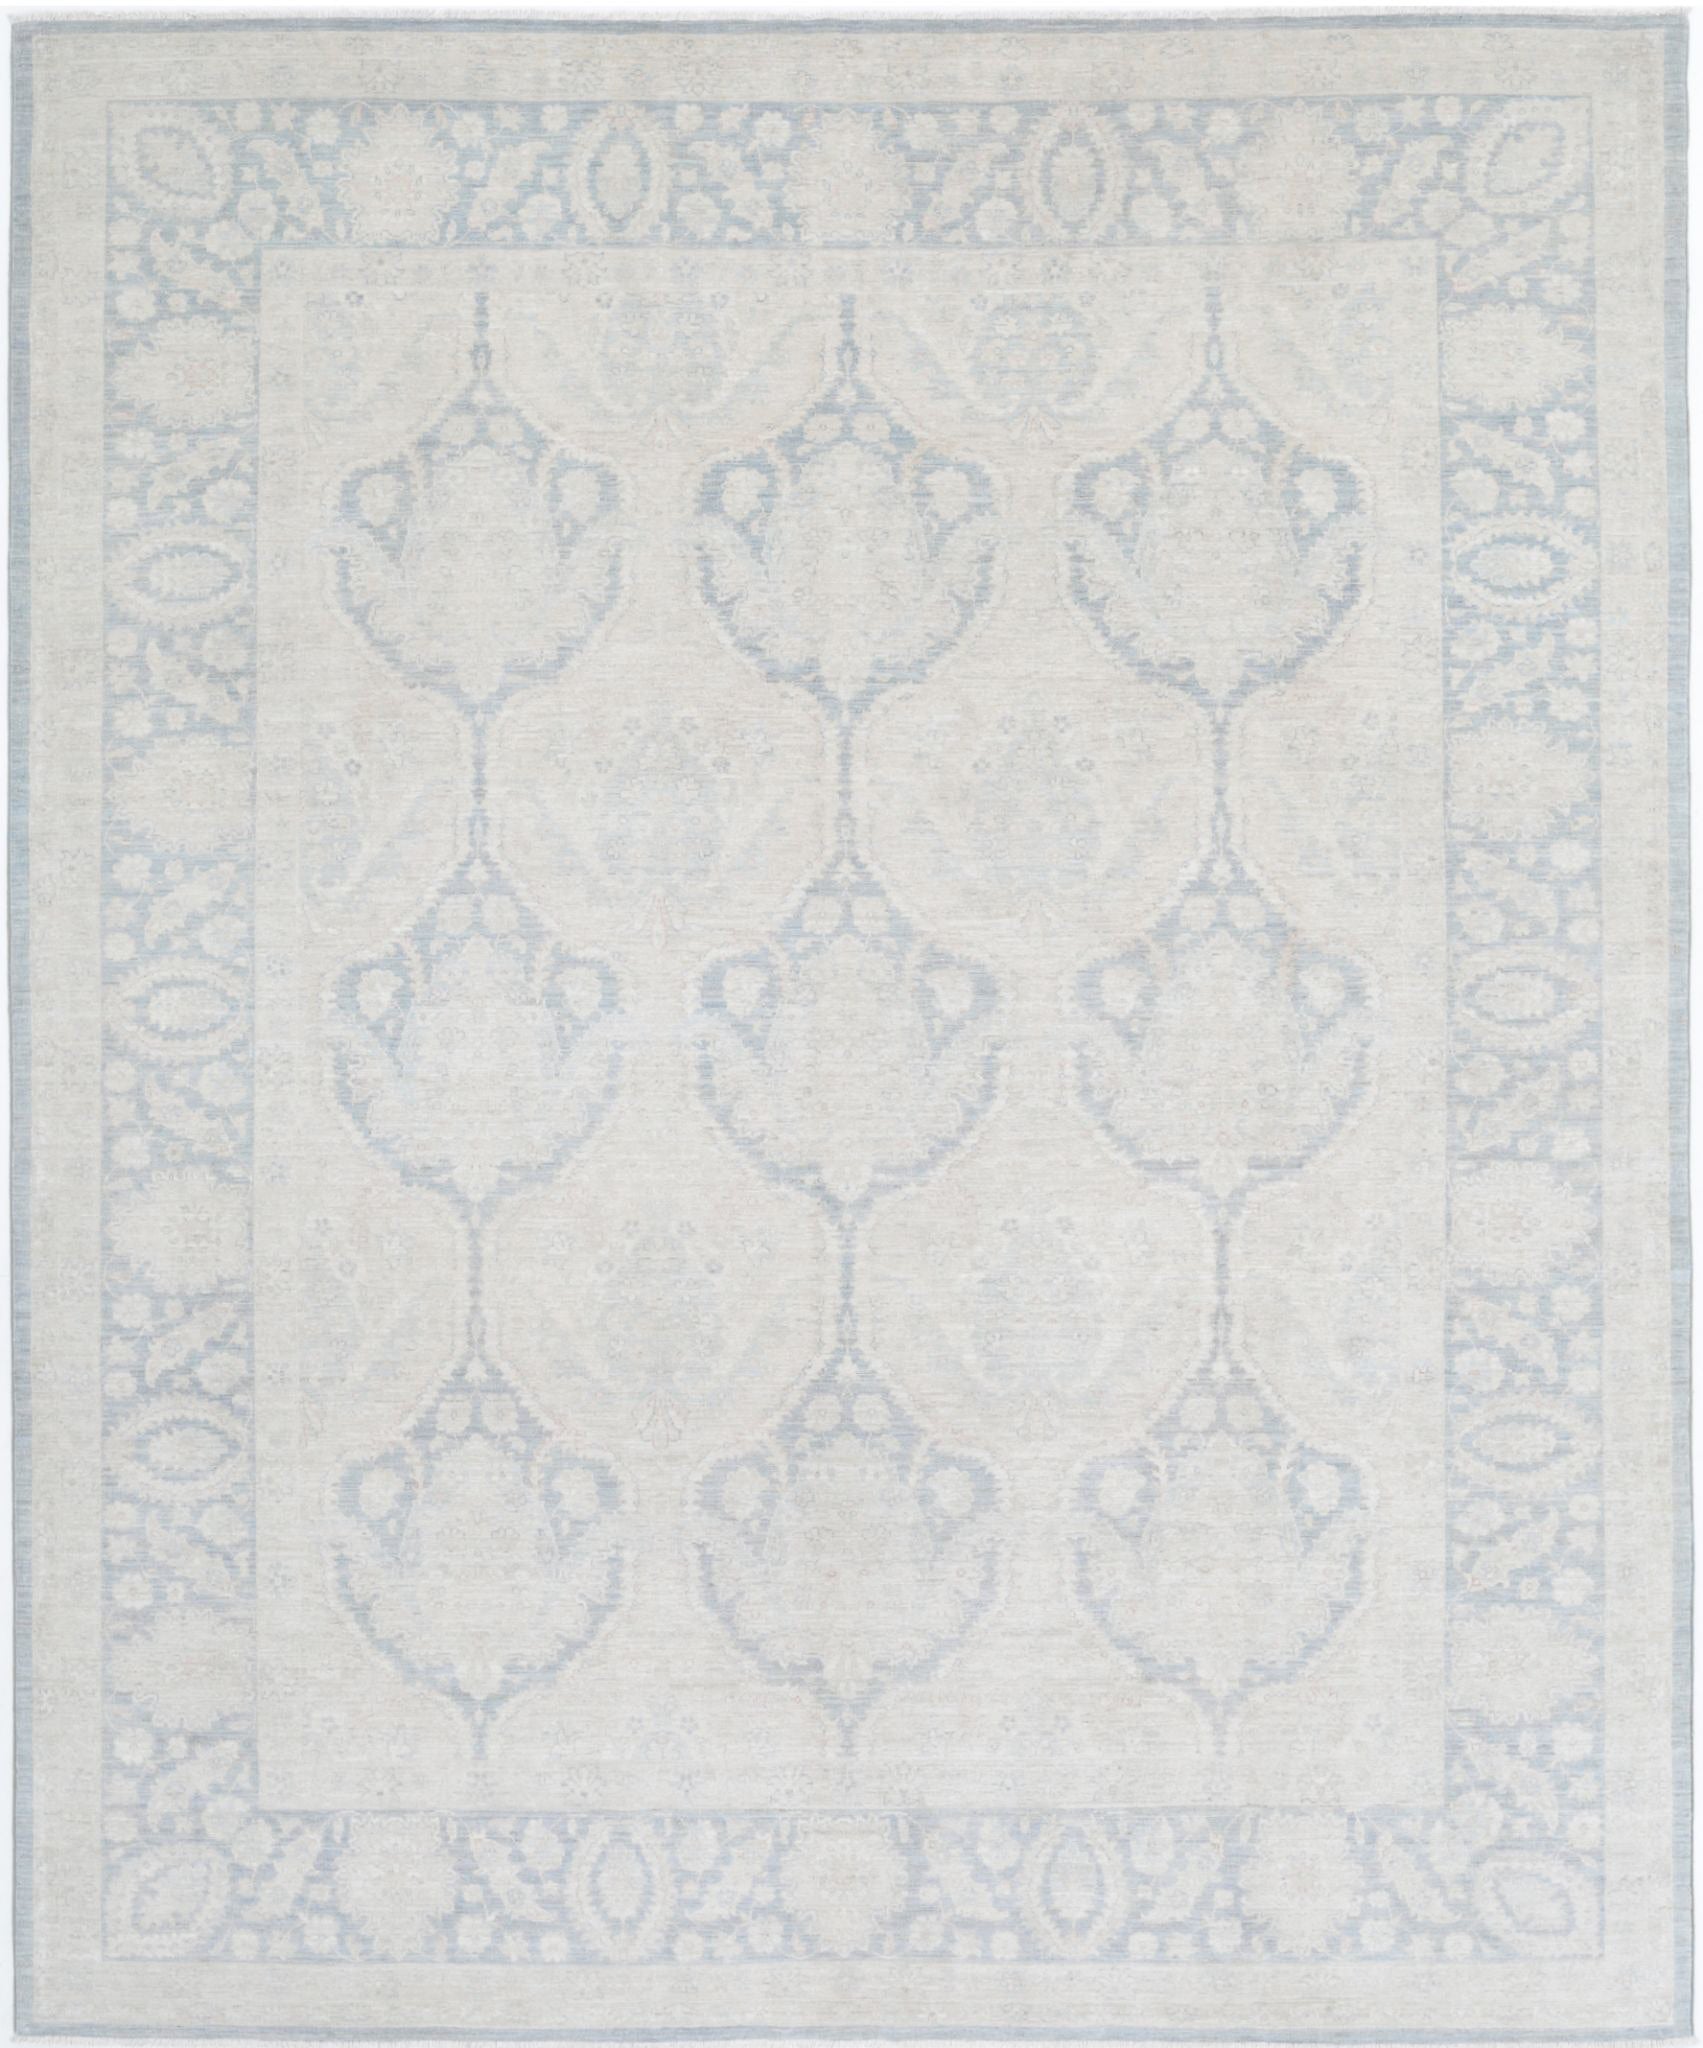    Serenity-hand-knotted-tabriz-wool-rug-5015183